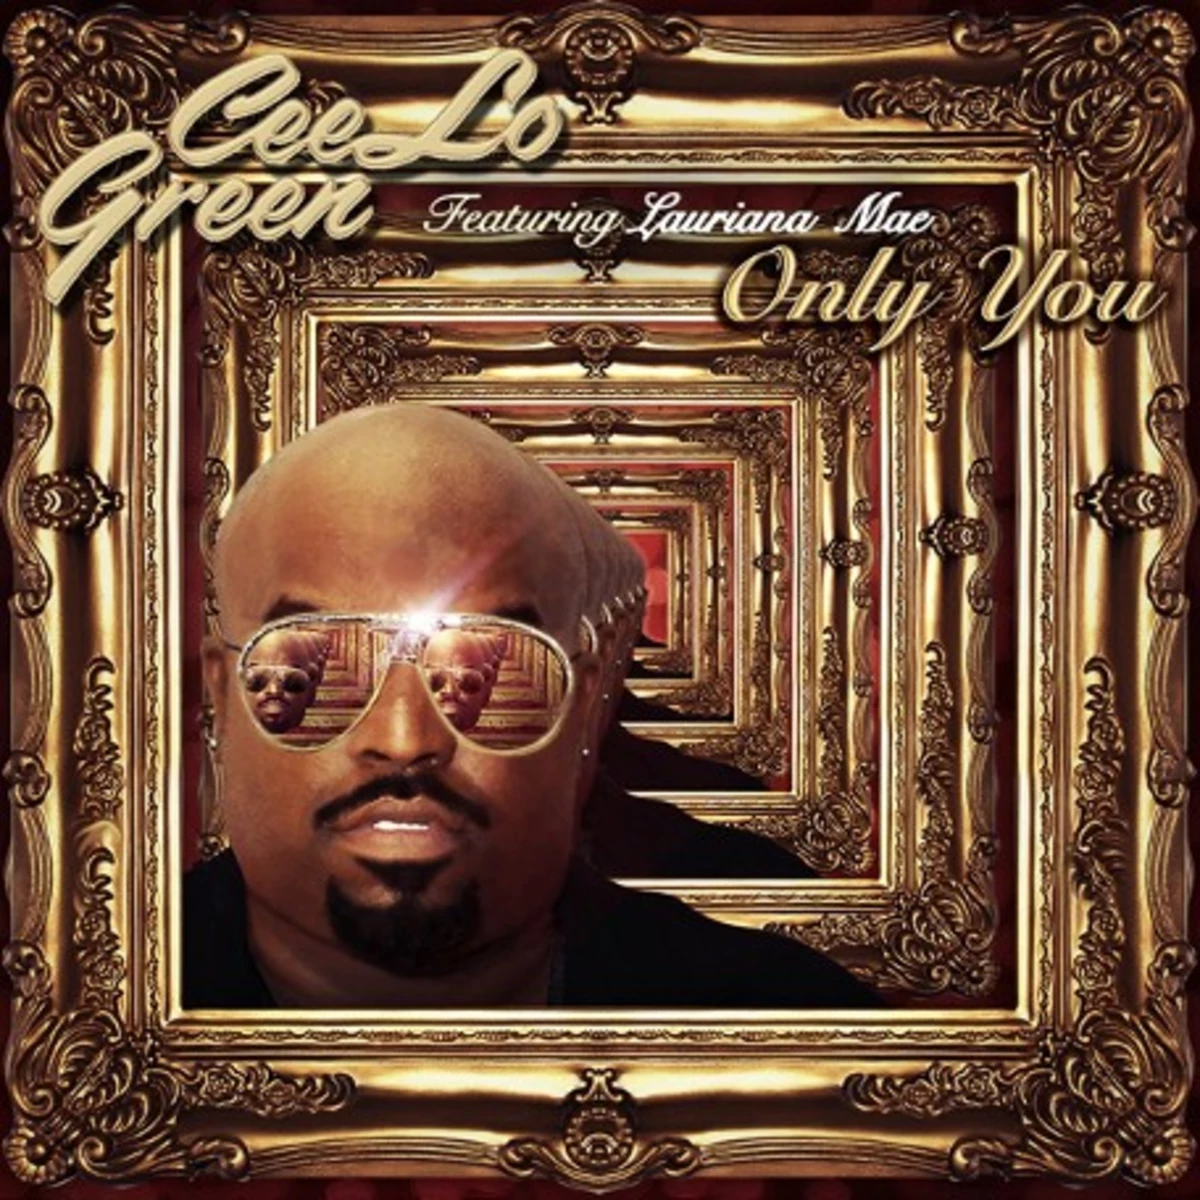 Cee Lo Green, New Song: 'Only You' feat. 